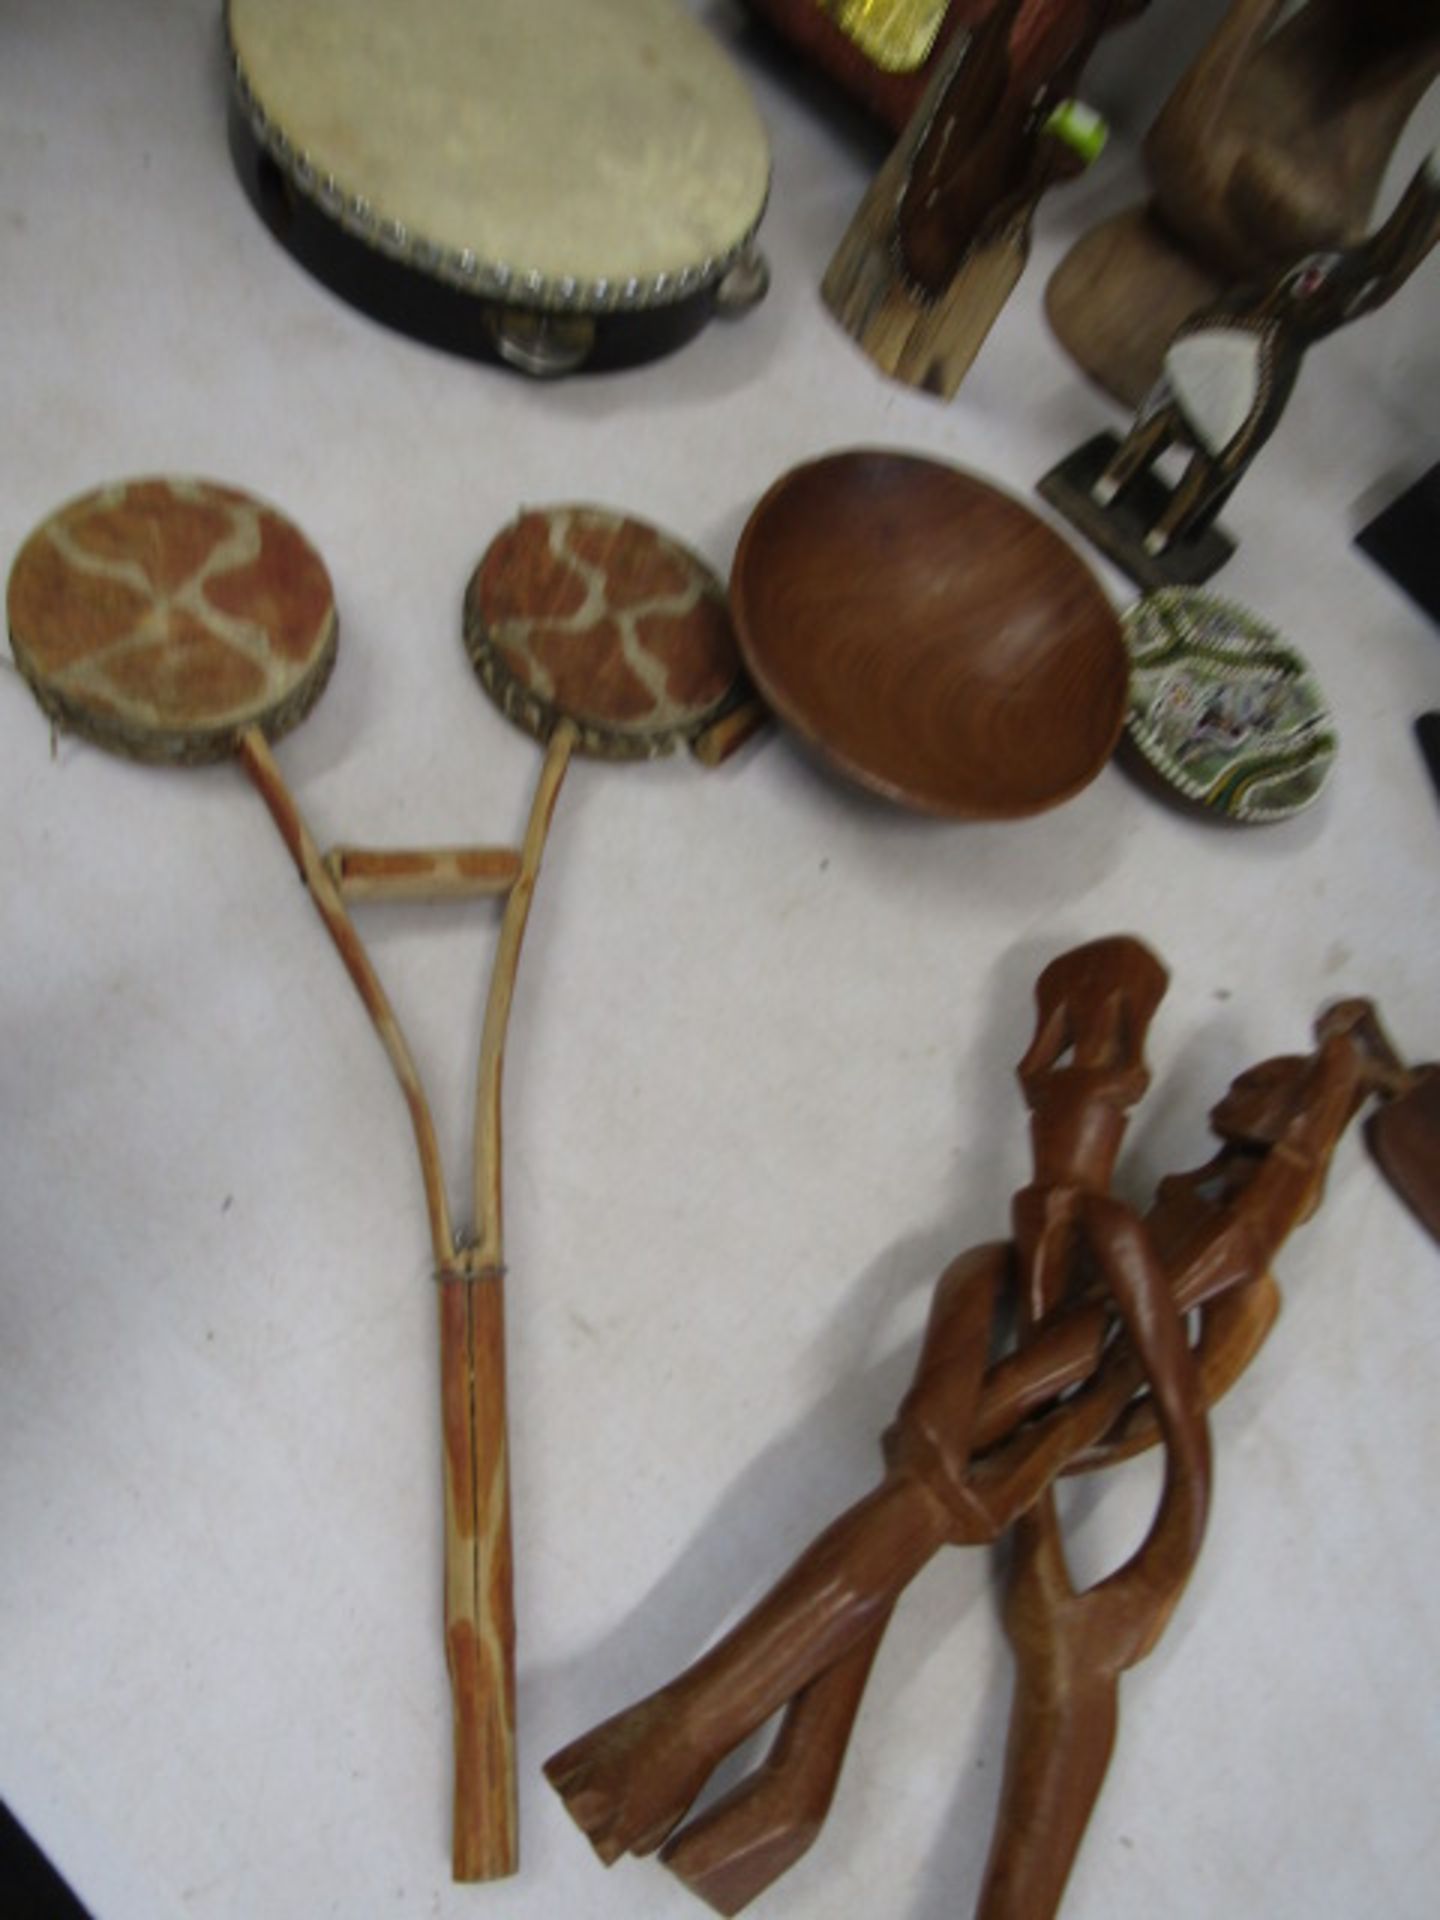 Treen Tribal items and instruments - Image 4 of 4